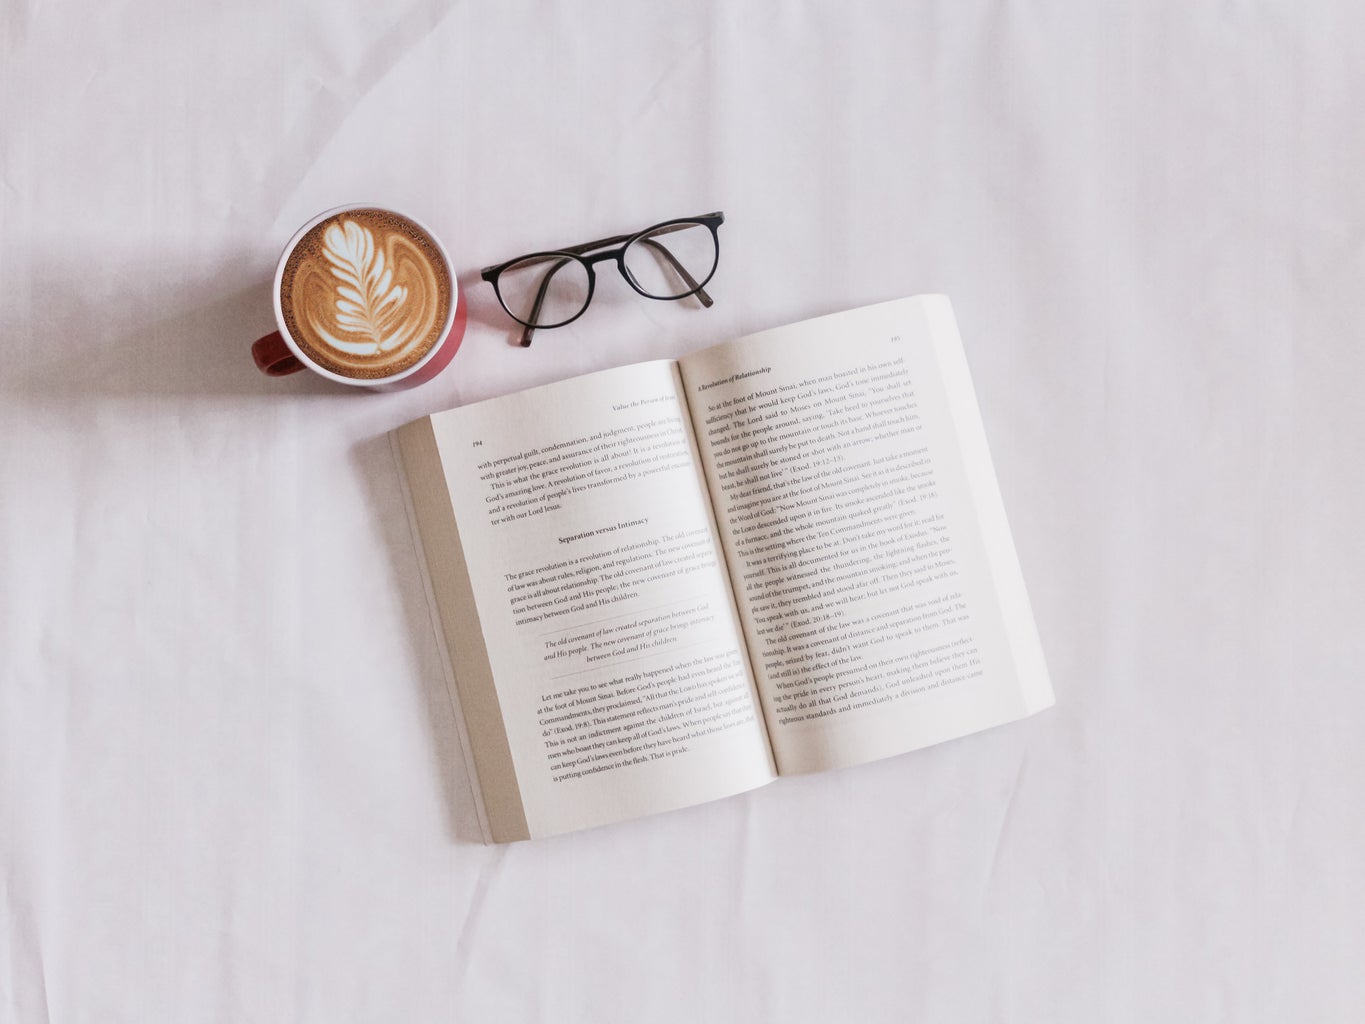 A book, coffee and a pair of glasses.